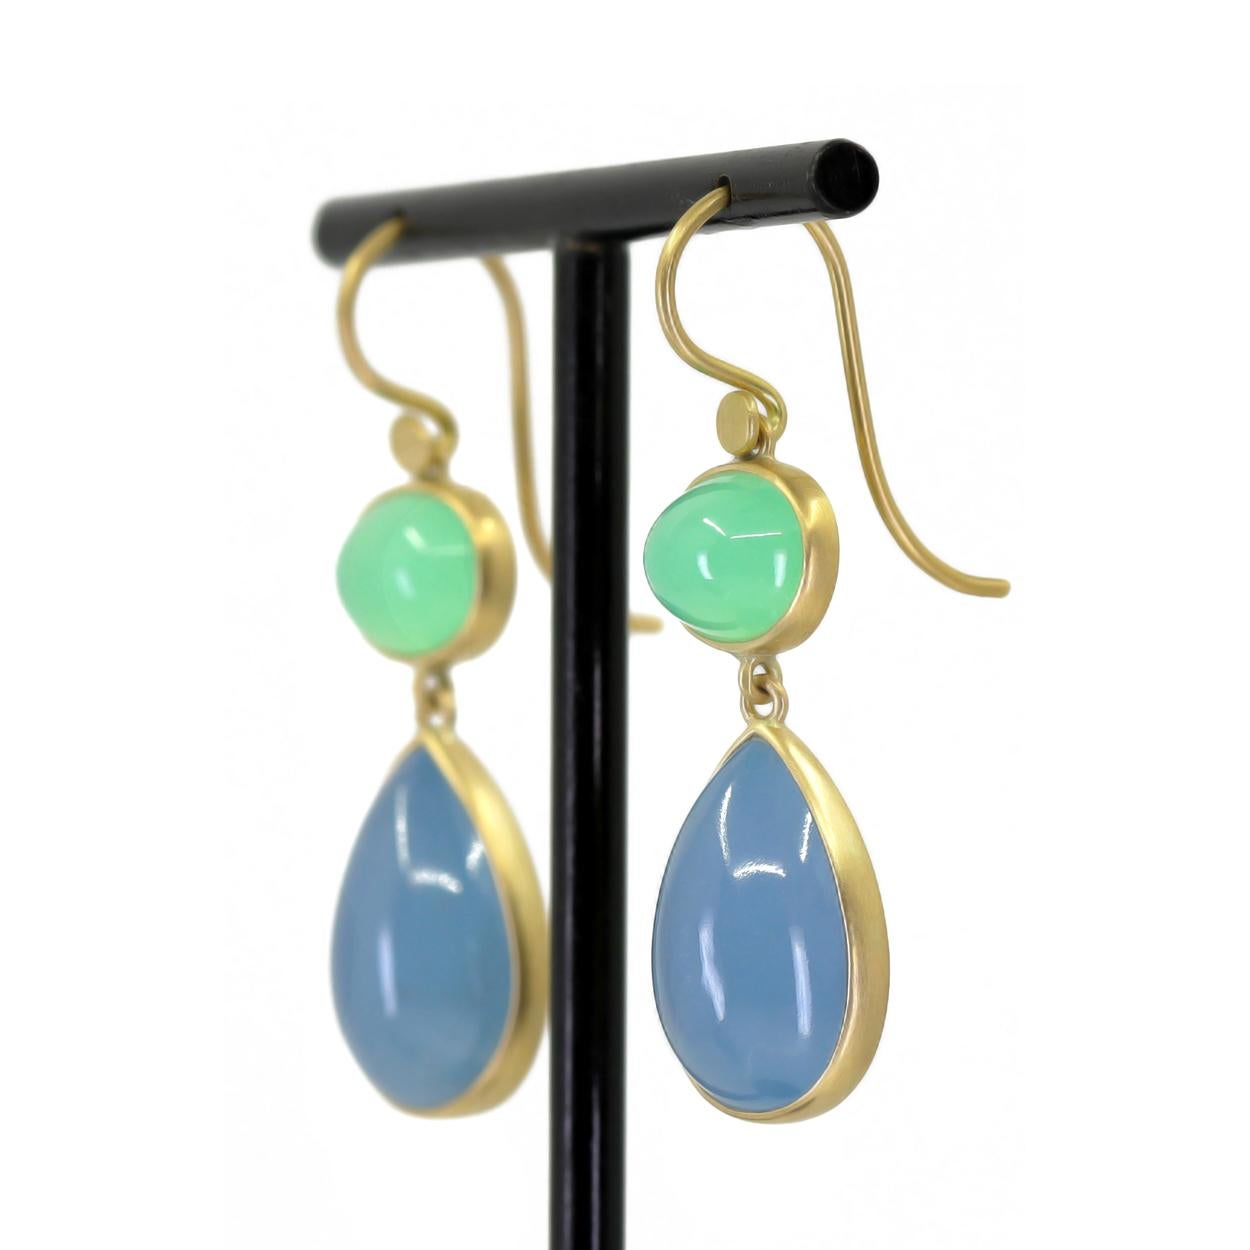 One of a Kind Drop Earrings by award-winning jewelry maker Lola Brooks, hand-fabricated in her signature-finished 18k yellow gold showcasing a gorgeous matched pair of pear-shaped aquamarine cabochons totaling 11.88 carats, bezel-set beneath an